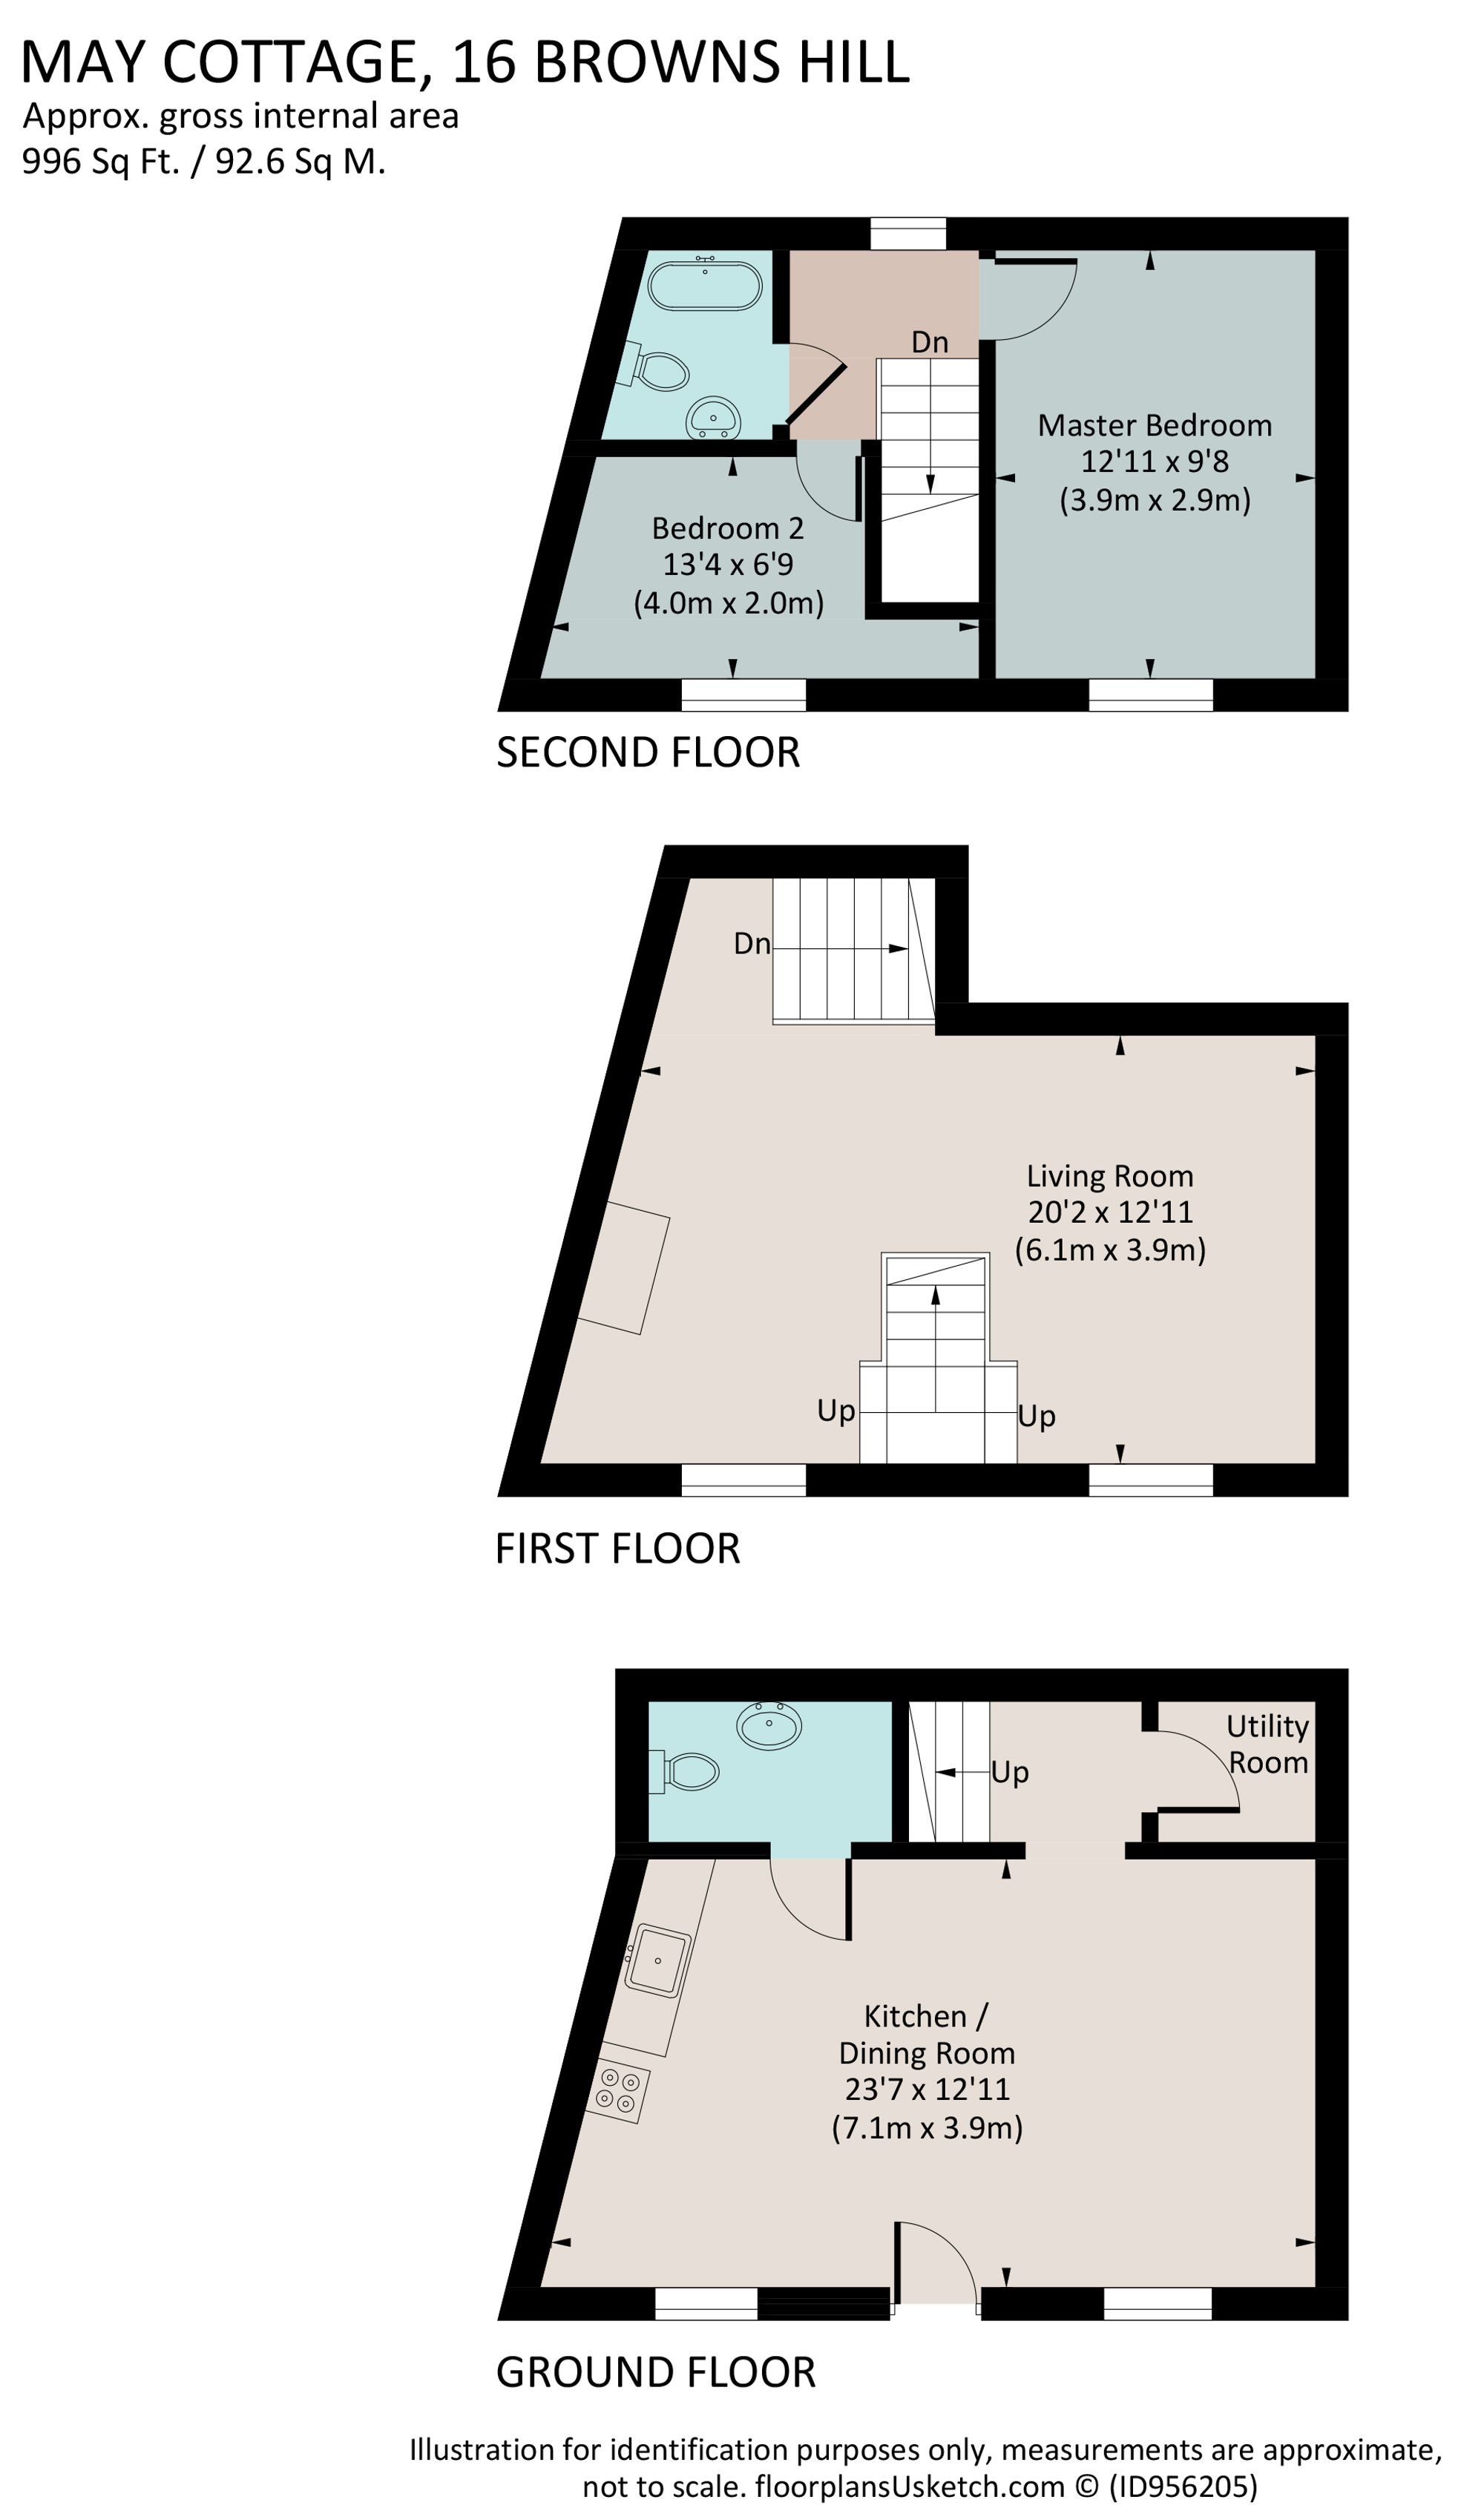 May Cottage, Browns Hill, Dartmouth floorplan